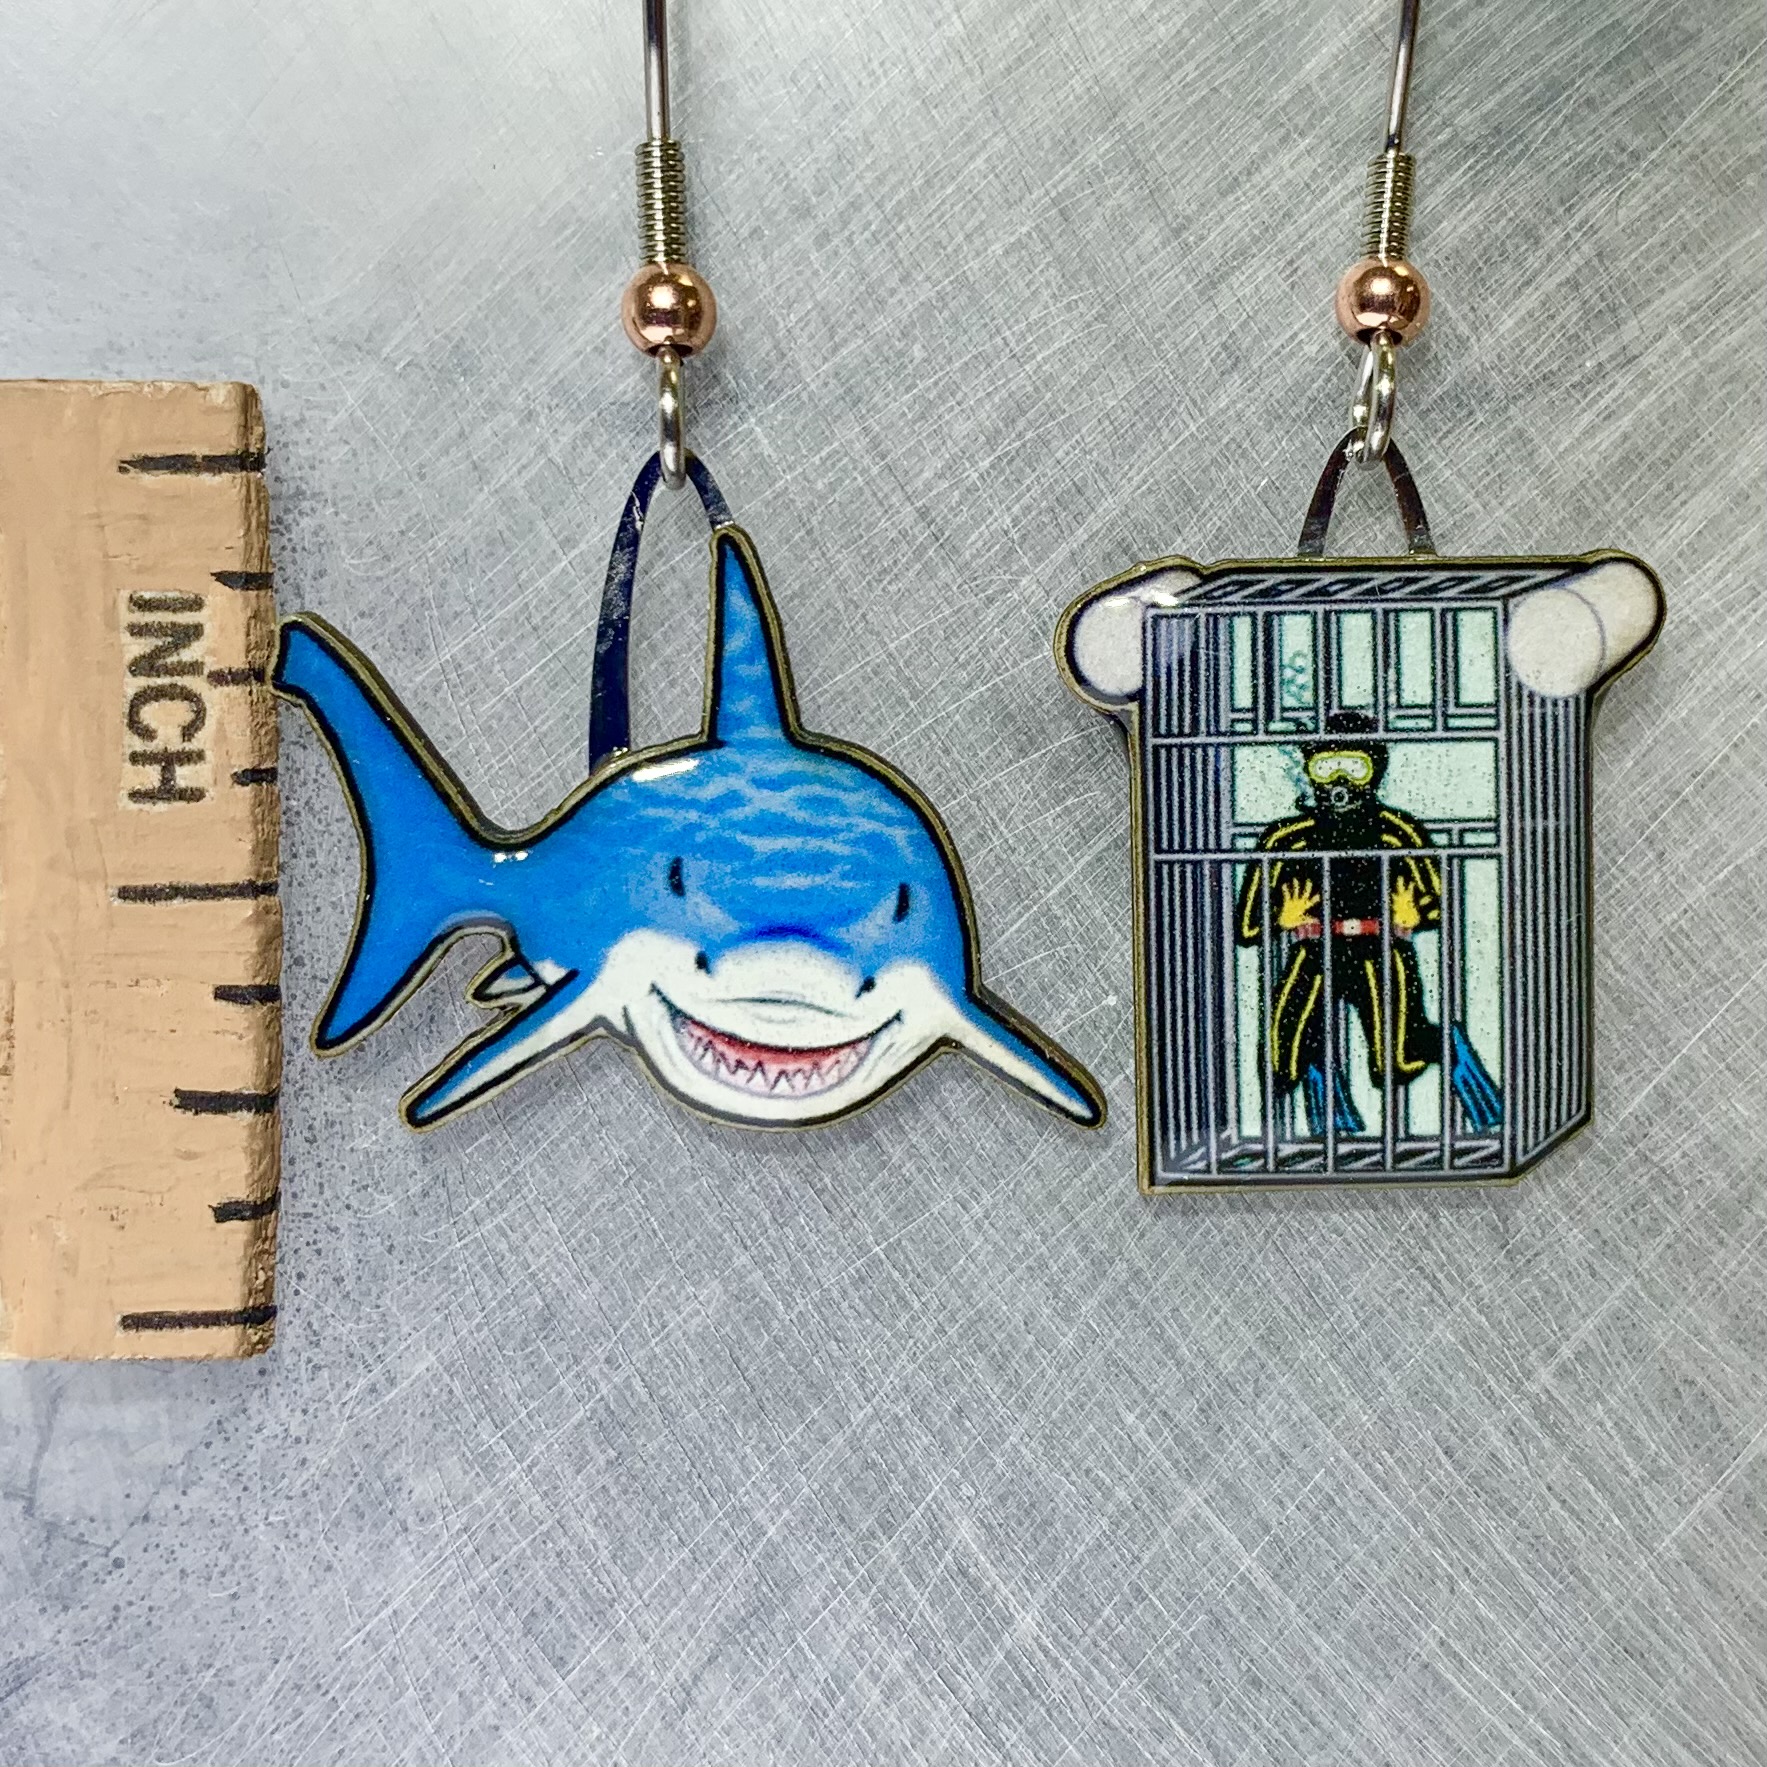 Picture shown is of 1 inch tall pair of earrings of the marine animal the Great White Shark.